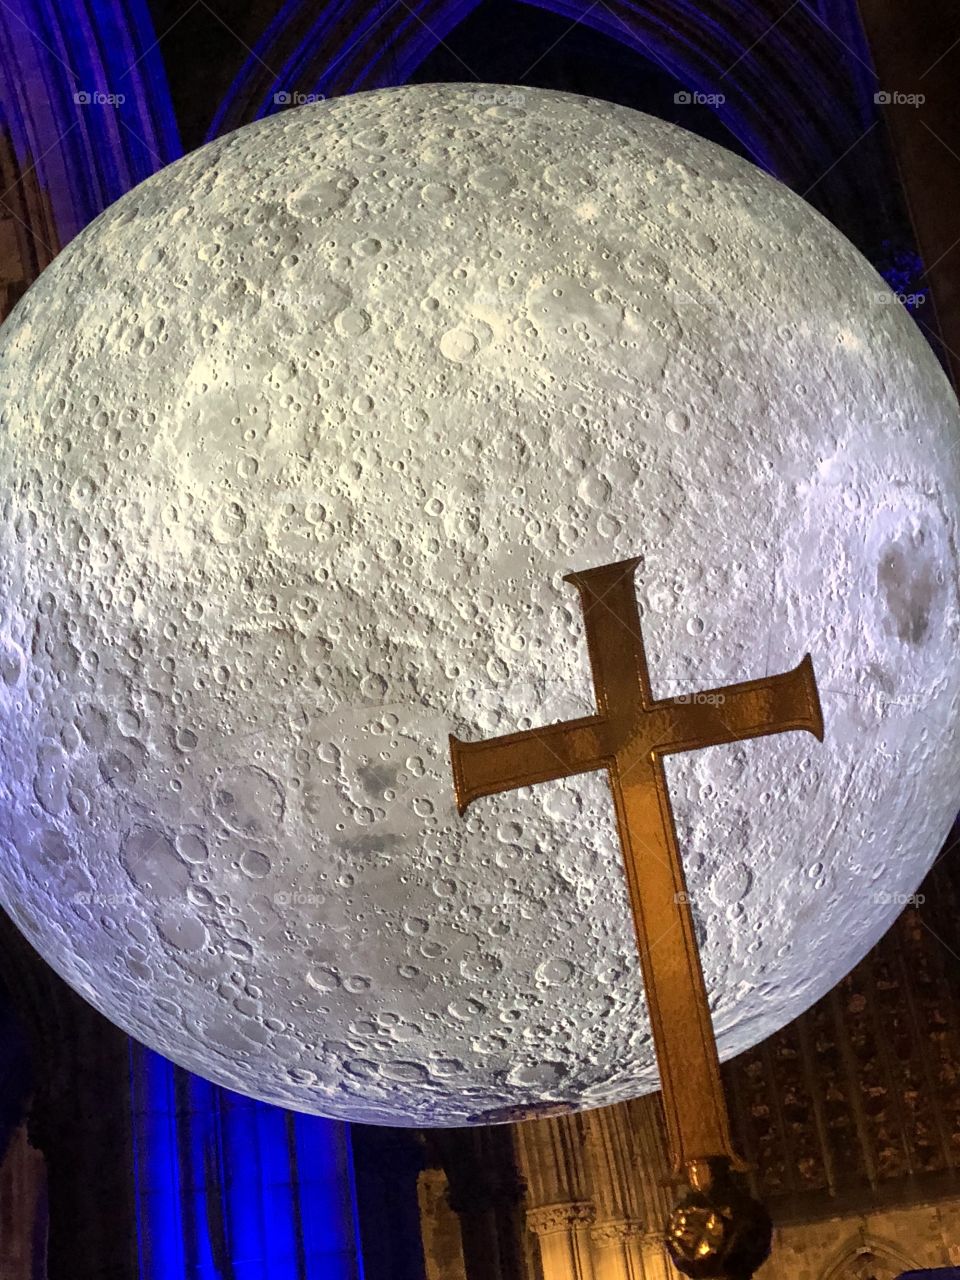 This beautiful moon art installation travelled the country and was seen in this particular instance in a beautiful Minster in Yorkshire. Seeing this gorgeous and stunning sculpture up close was a sight to behold